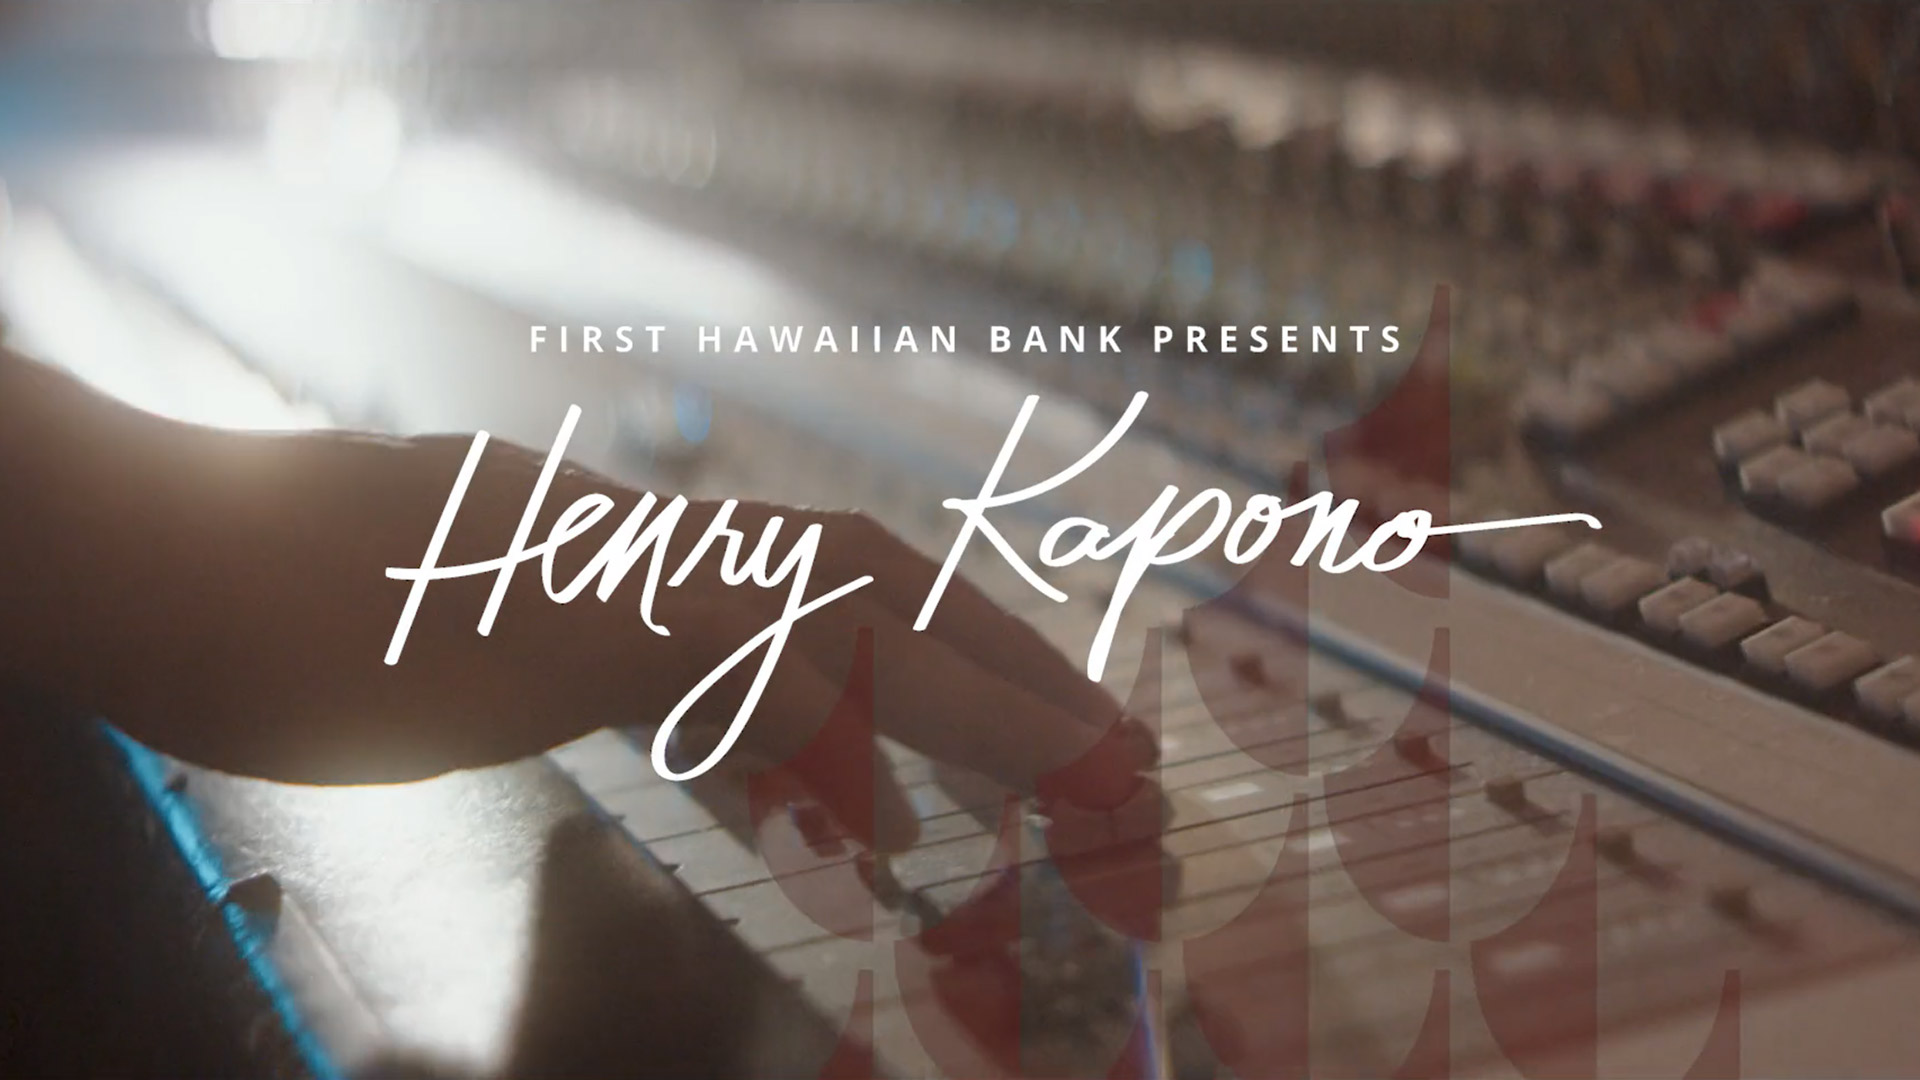 First Hawaiian Bank: Small Business Banking with Henry Kapono (Full)